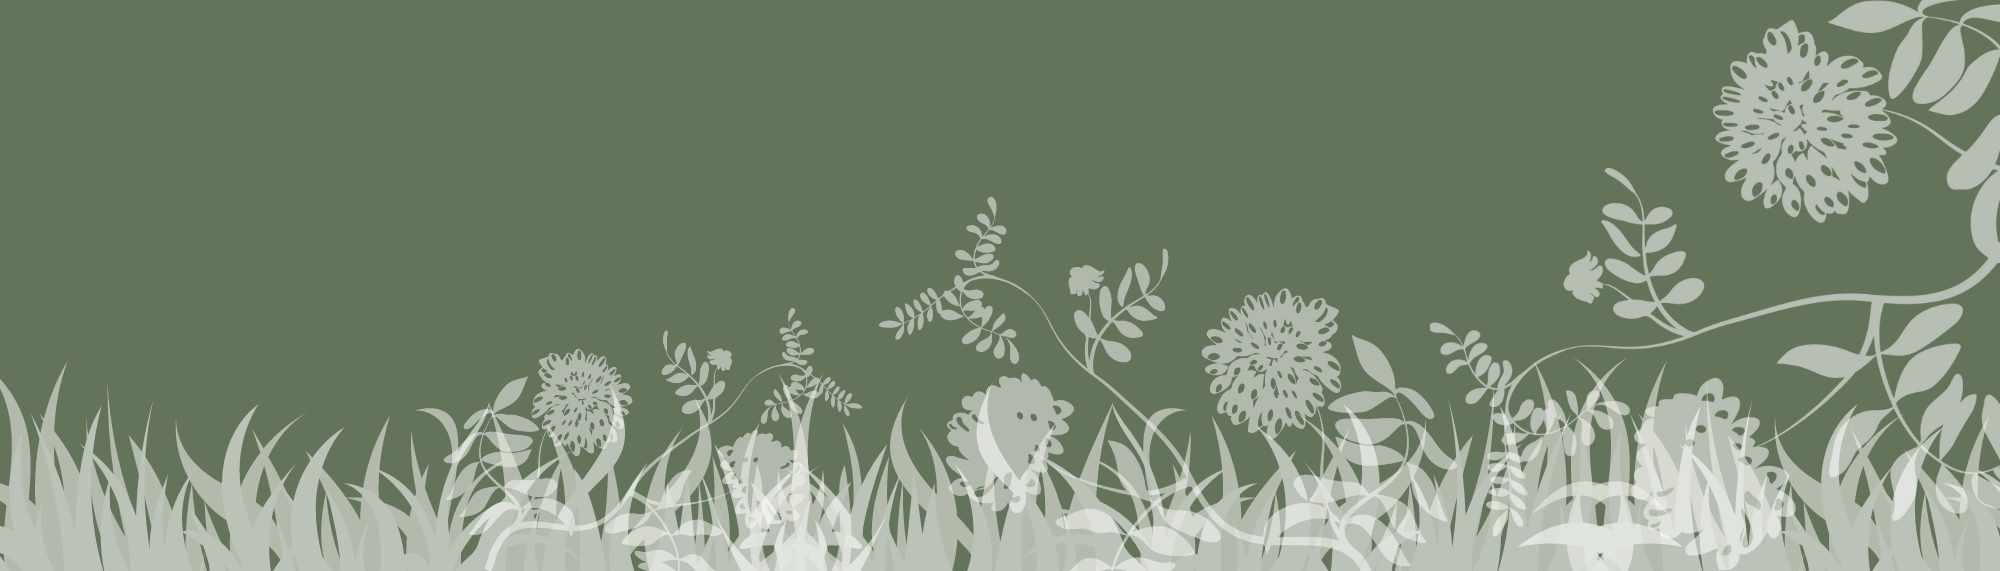 Additional Spring Turf Tips blog cover with green background and white flower overlay.